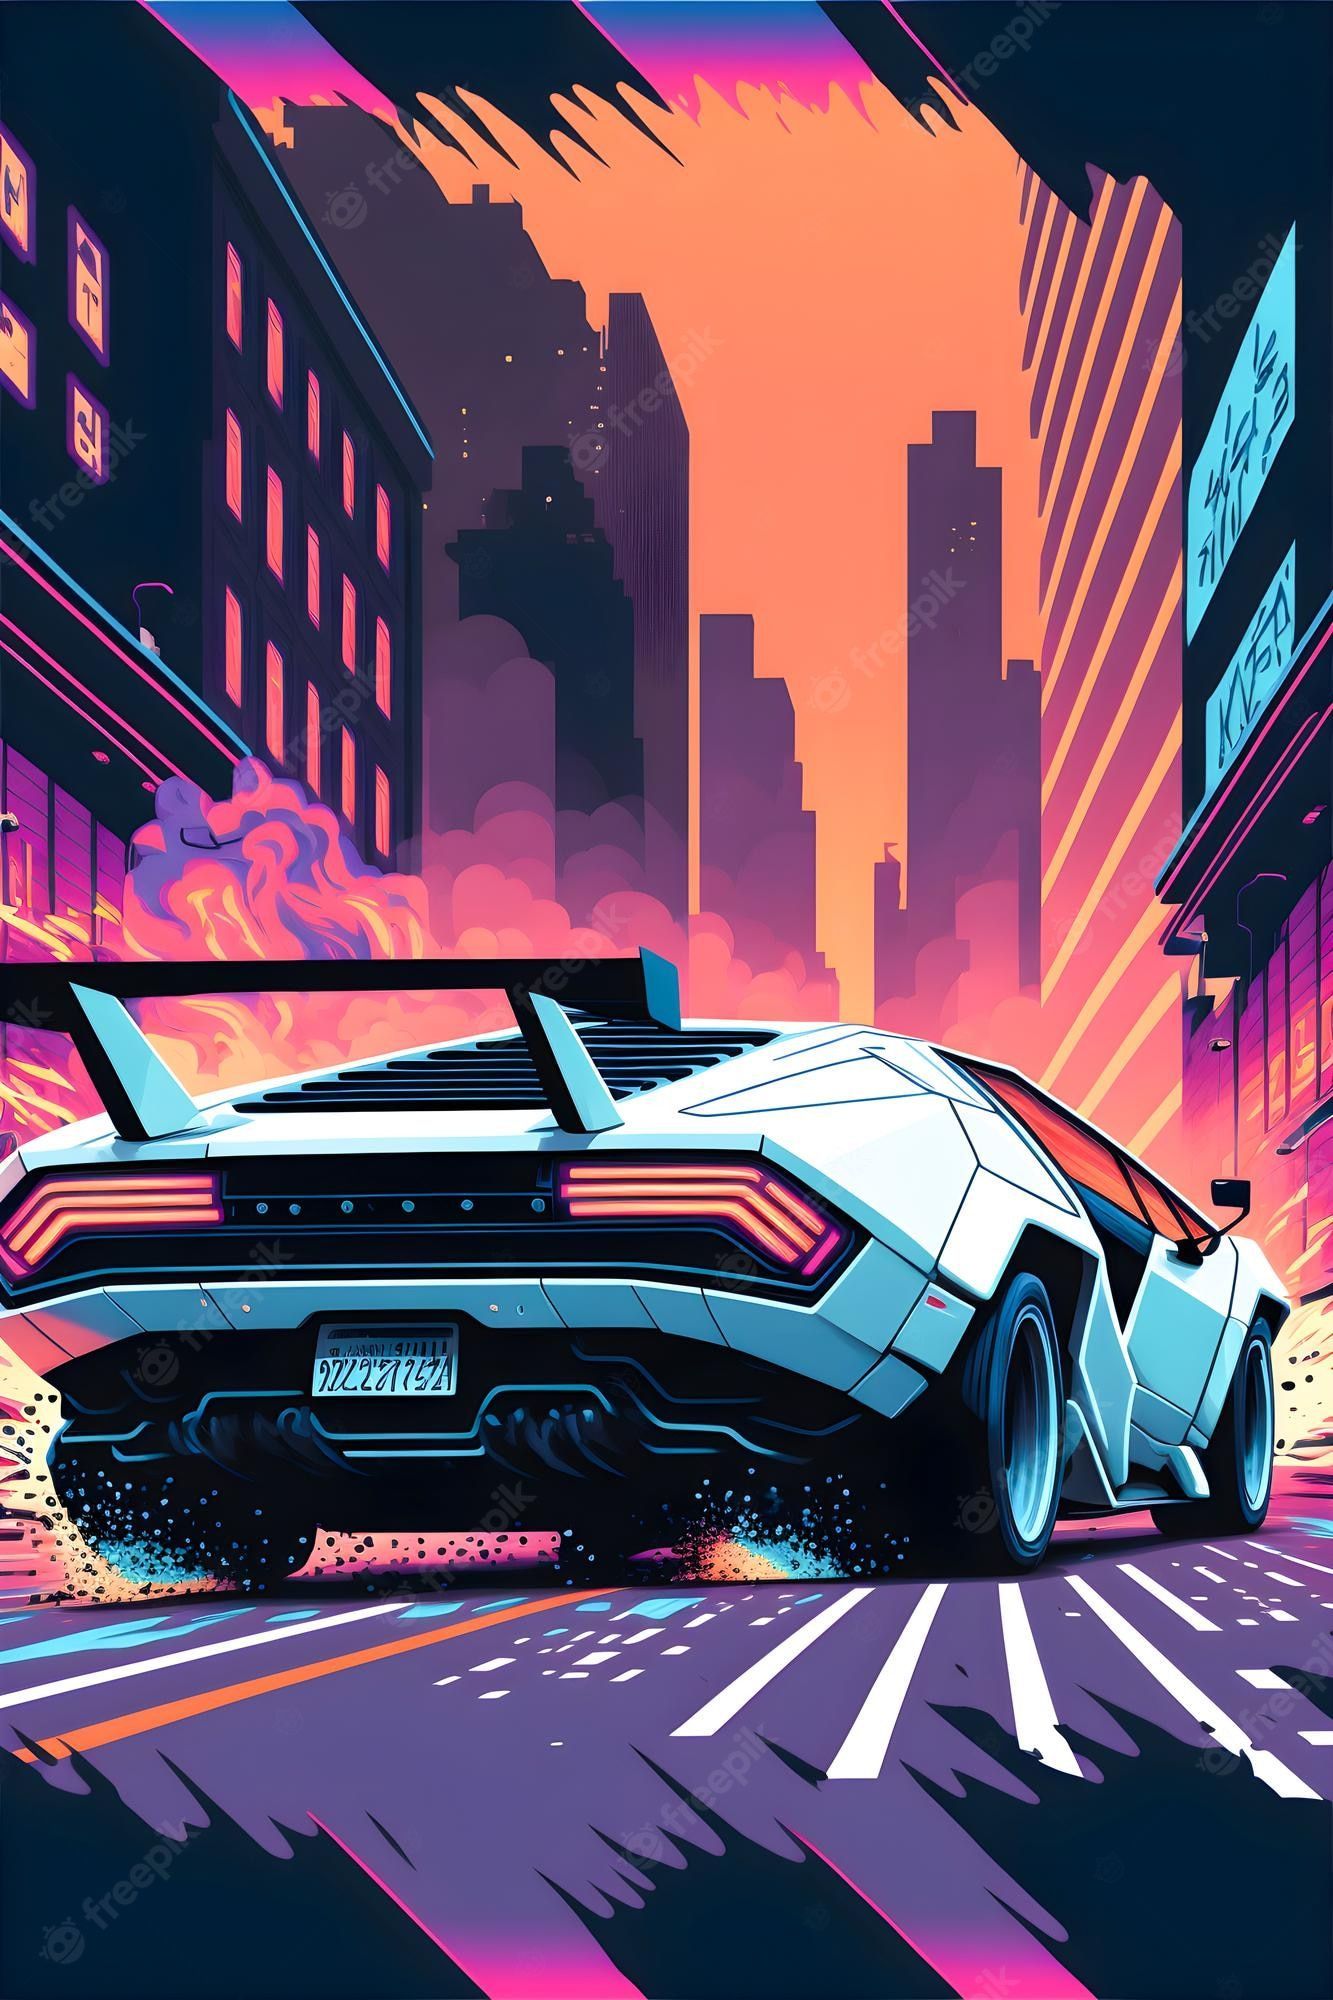 An illustration of a futuristic car with neon lights driving through a city at night - Synthwave